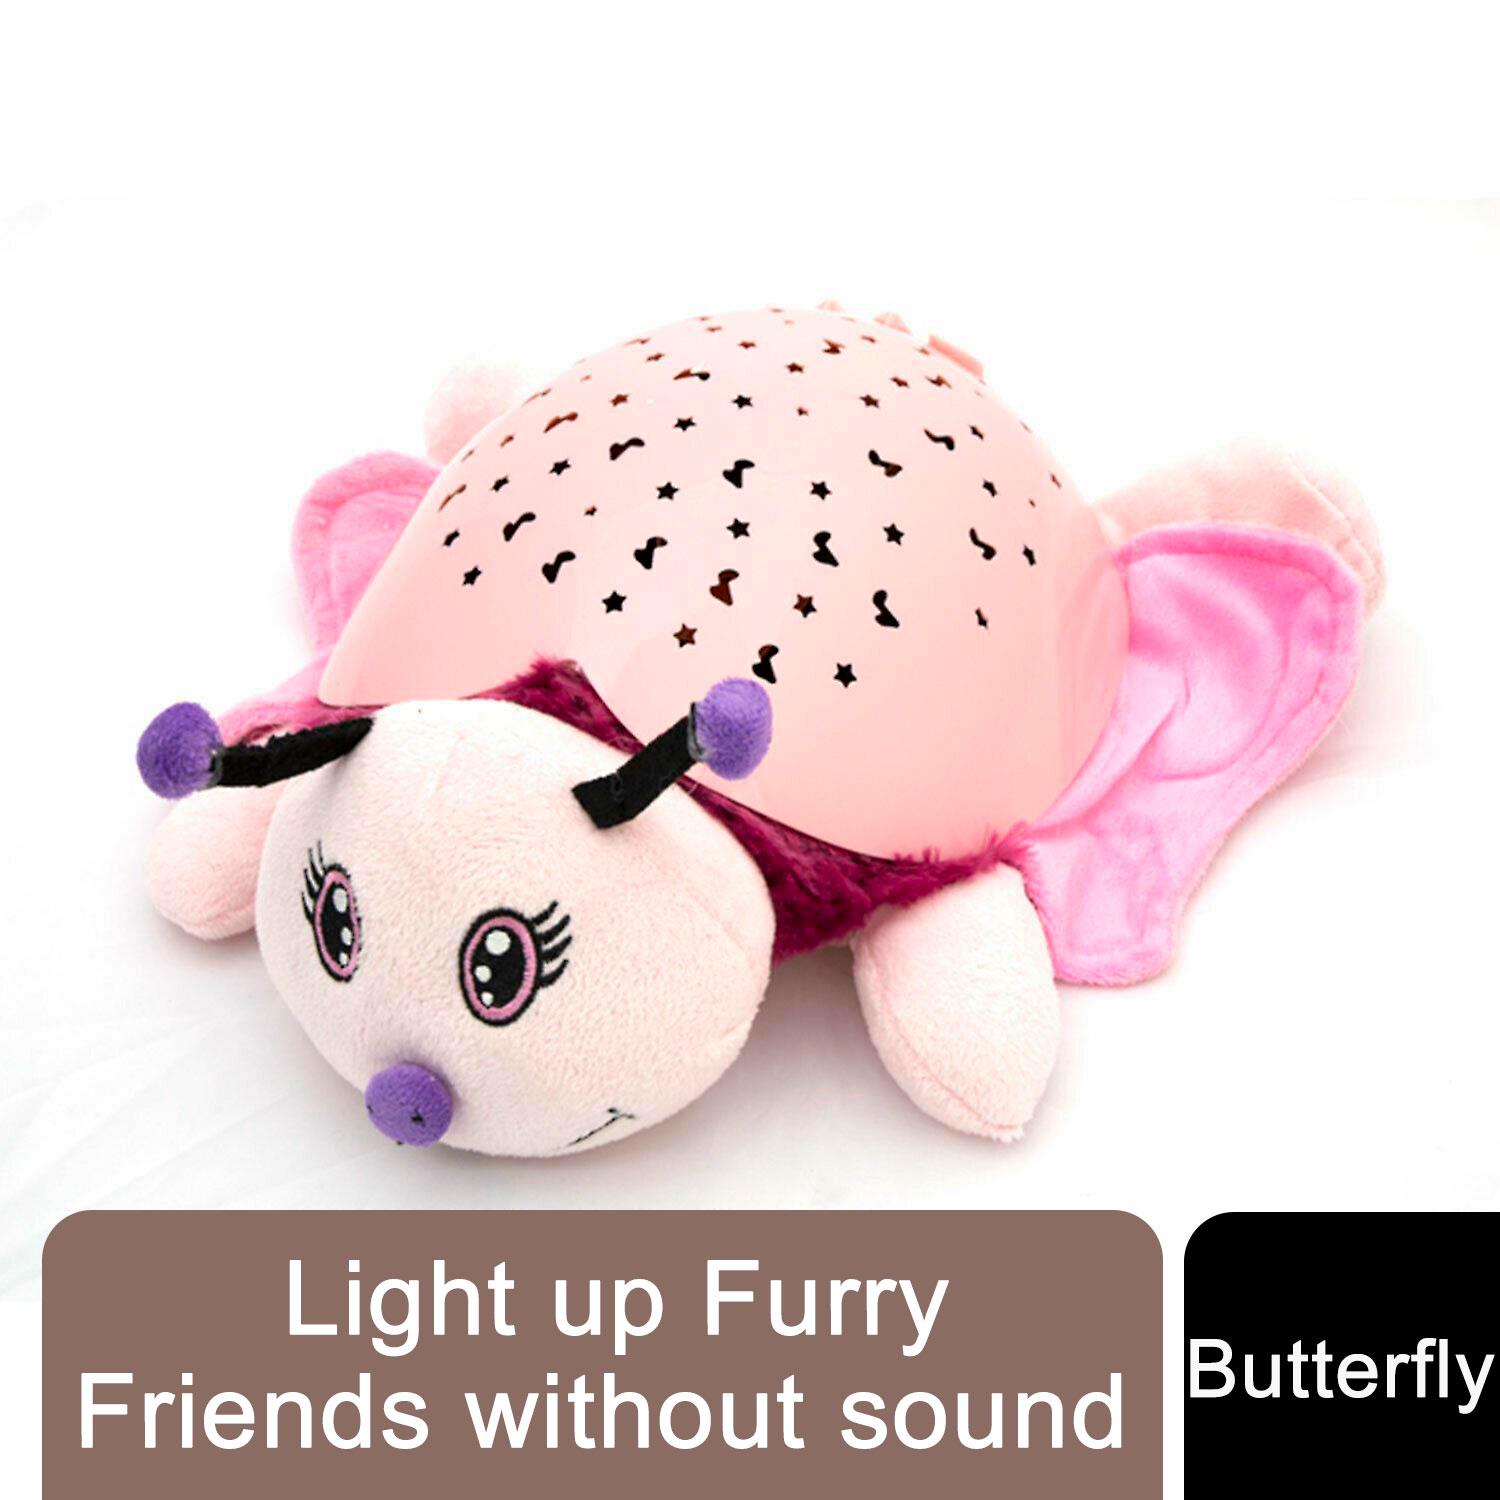 Light up Furry Friends without sound – Butterfly